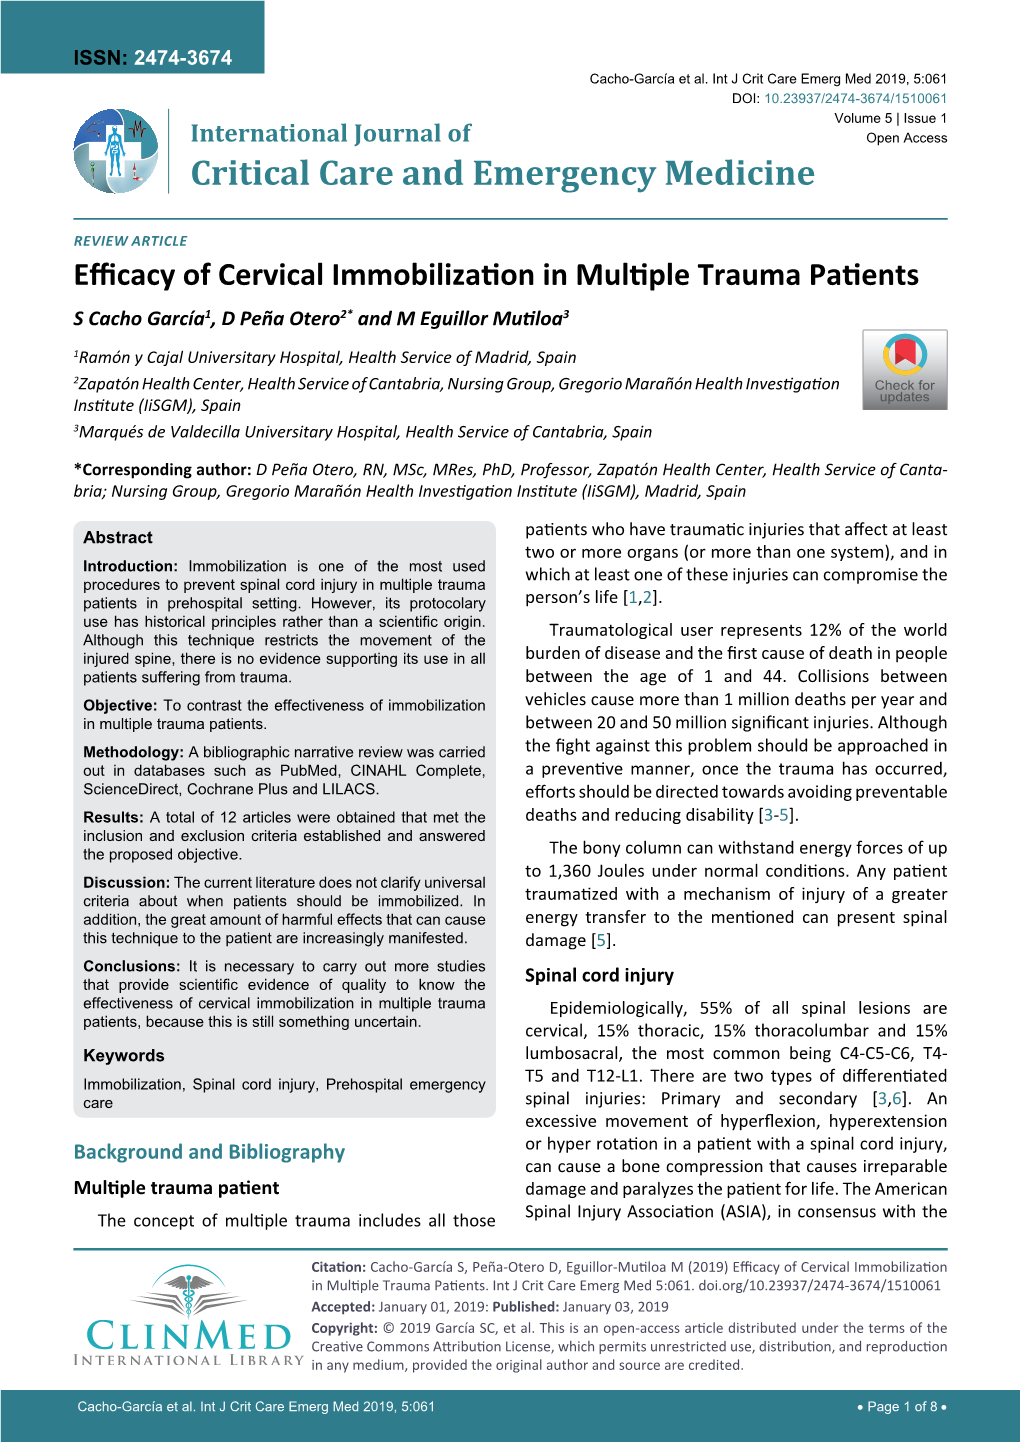 Efficacy of Cervical Immobilization in Multiple Trauma Patients S Cacho García1, D Peña Otero2* and M Eguillor Mutiloa3